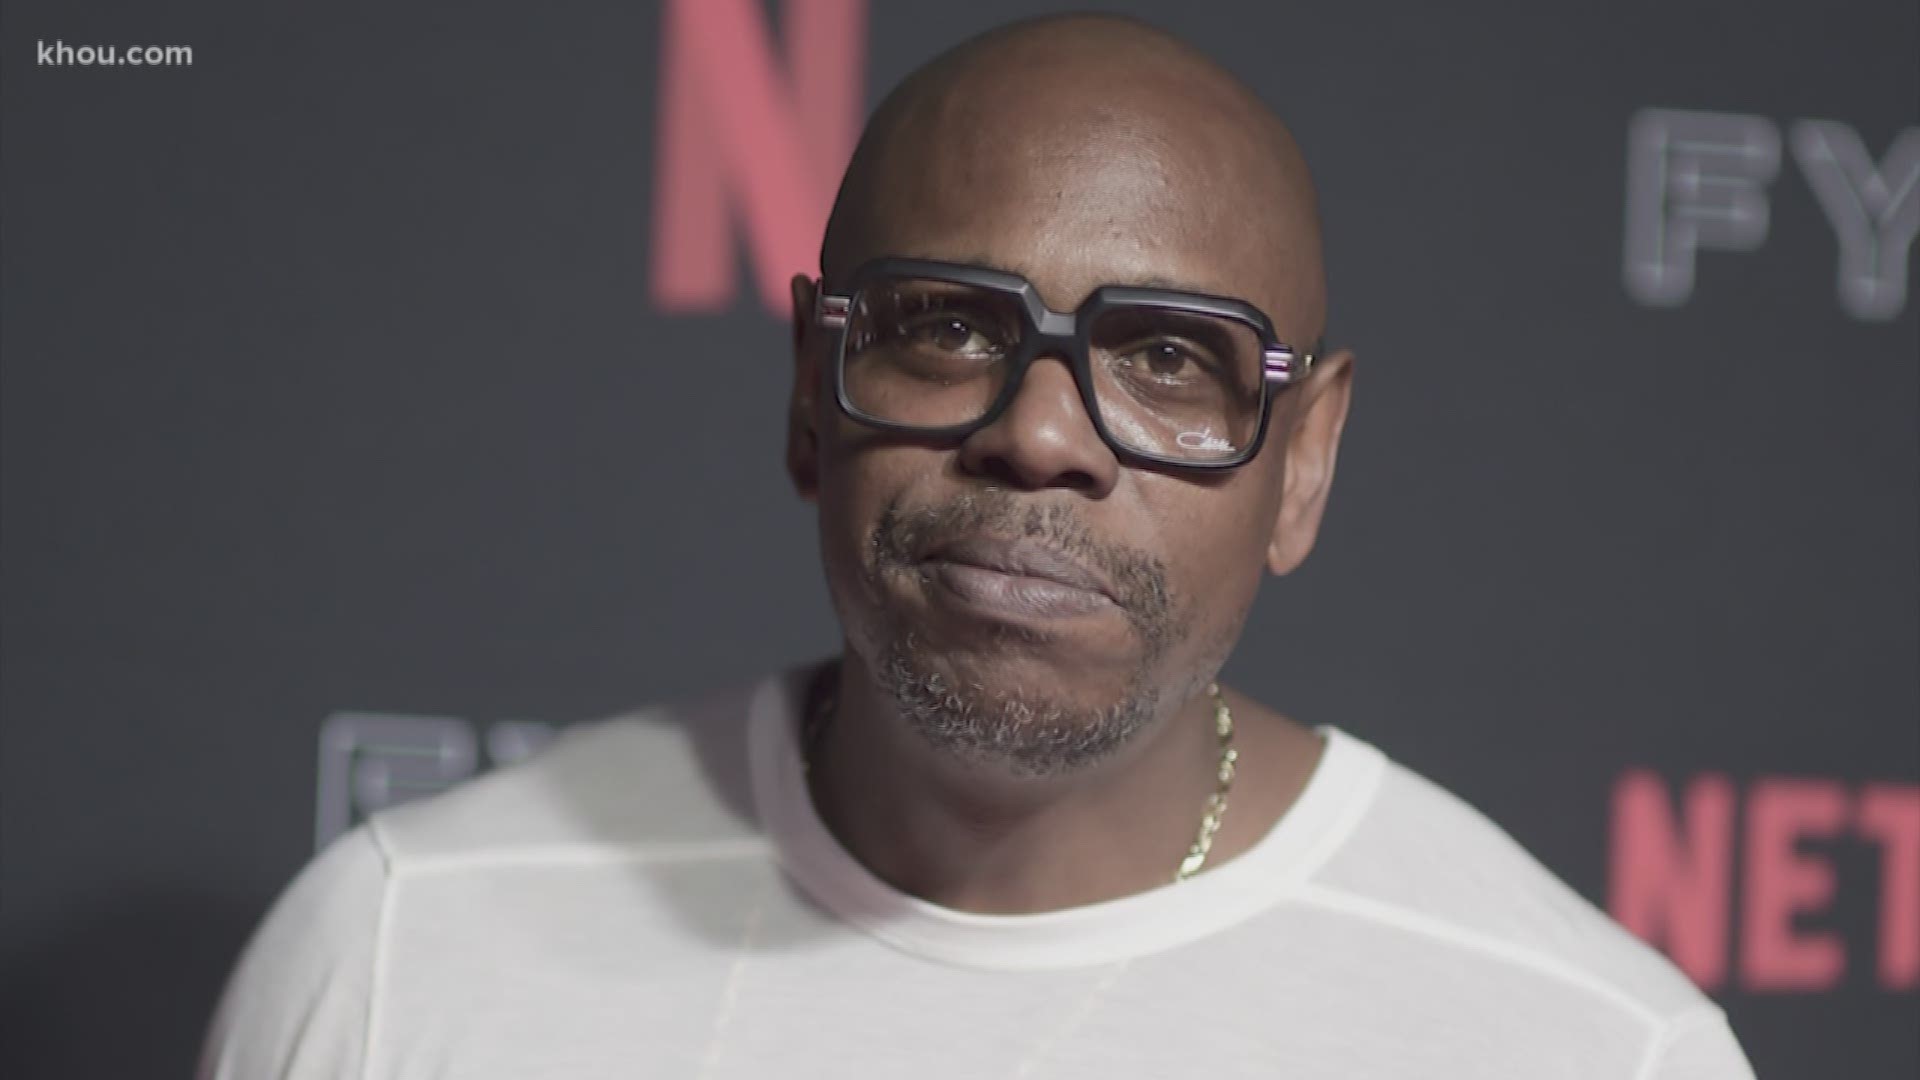 Dave Chappelle surprised all of Houston when he announced a surprise show at the House of Blues.